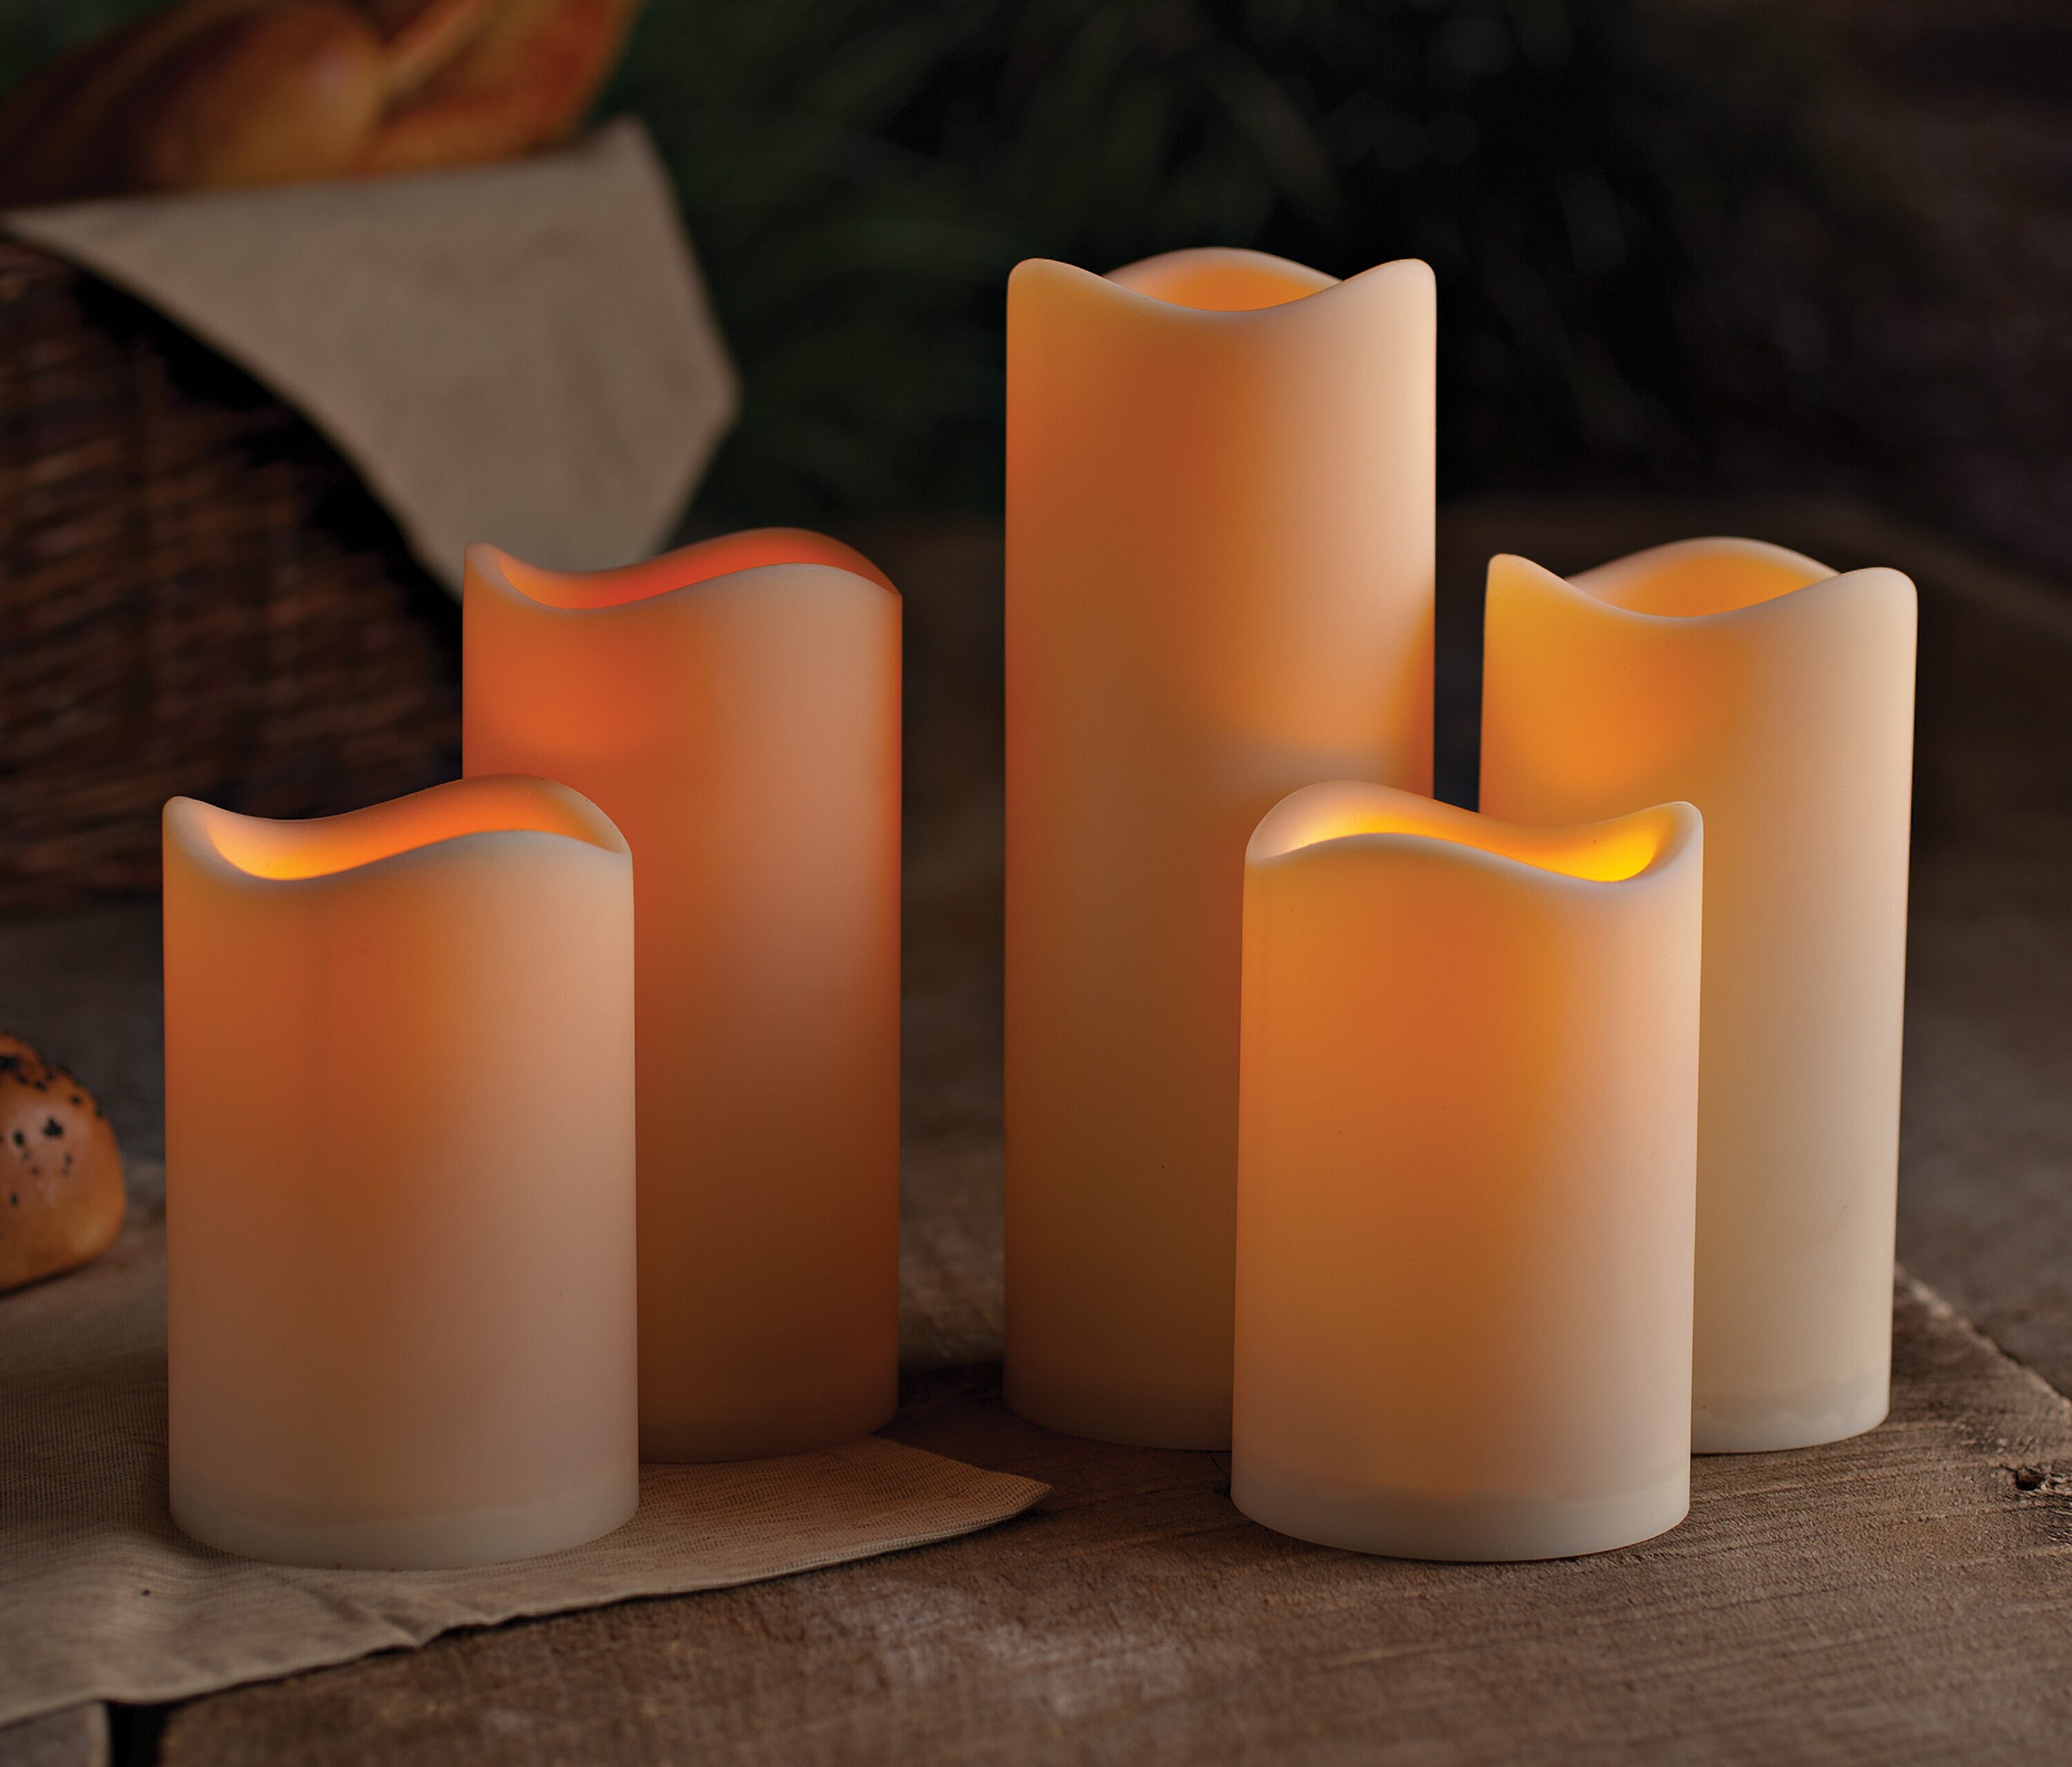 Everlasting Glow Home 5-Pack 1-Wick Unscented Off-white Flameless